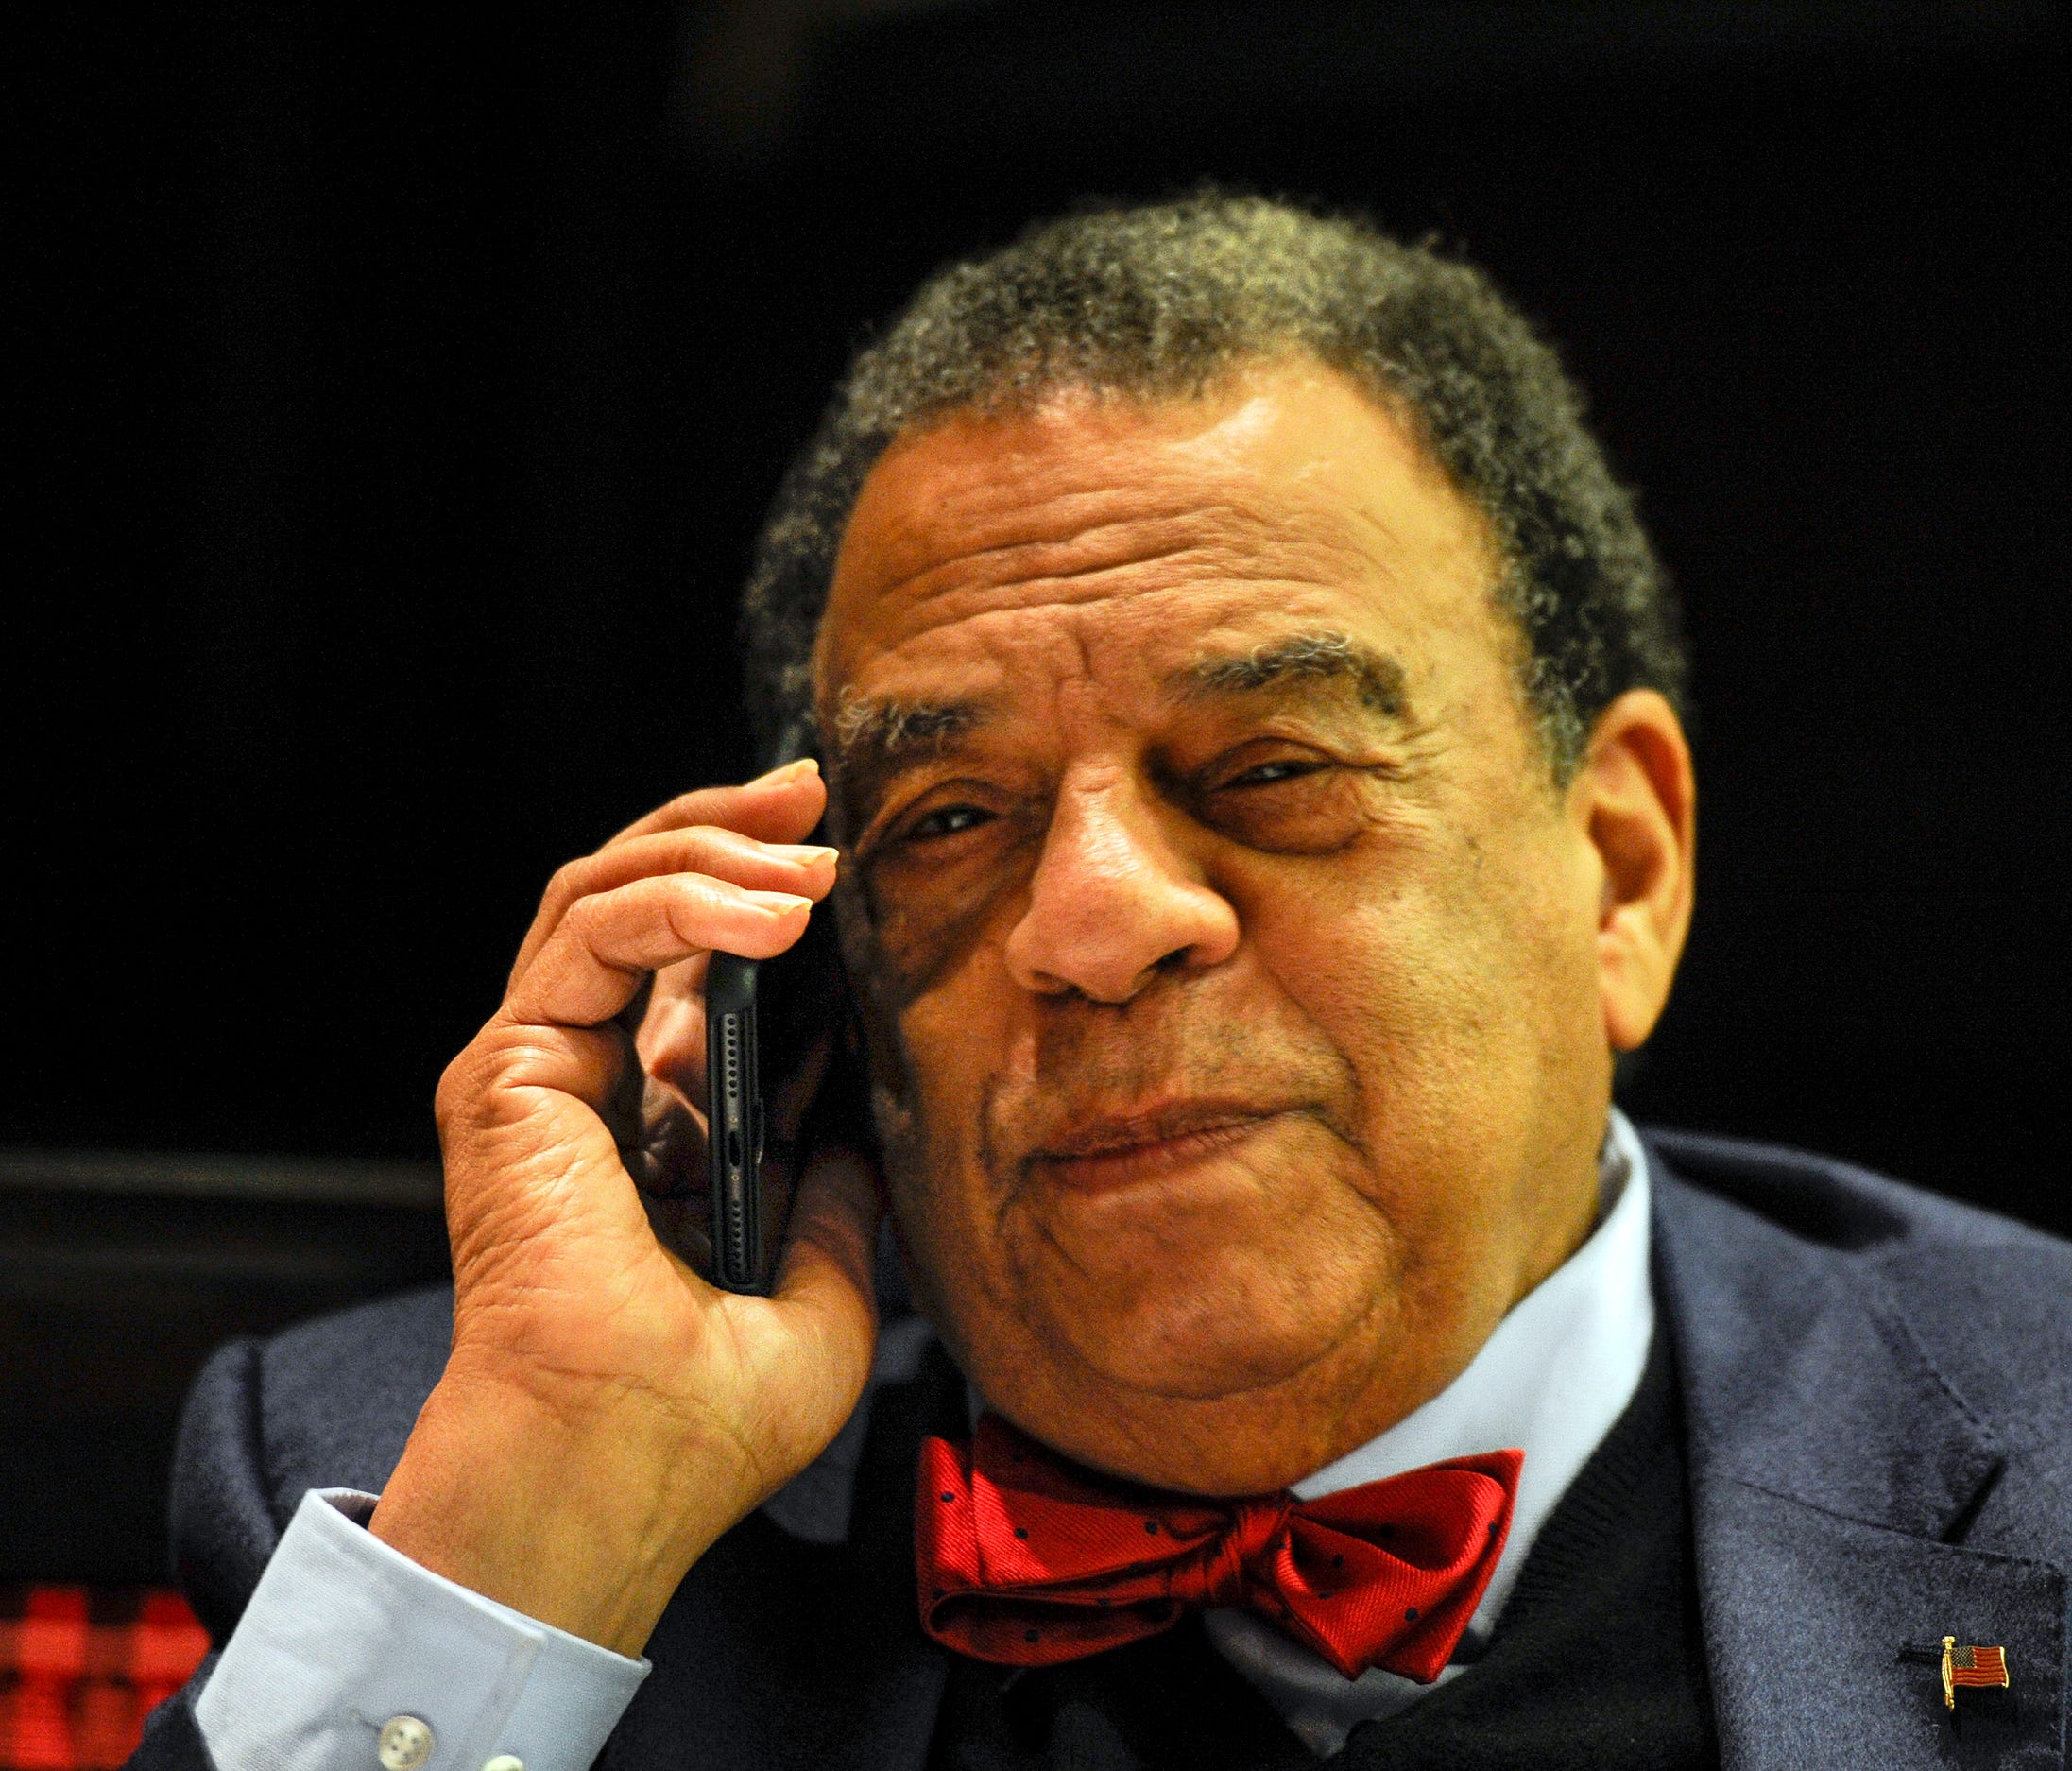 Ambassador Andrew Young takes a phone call Jan. 16, 2017, from President-elect Donald Trump during an interview in Nashville.